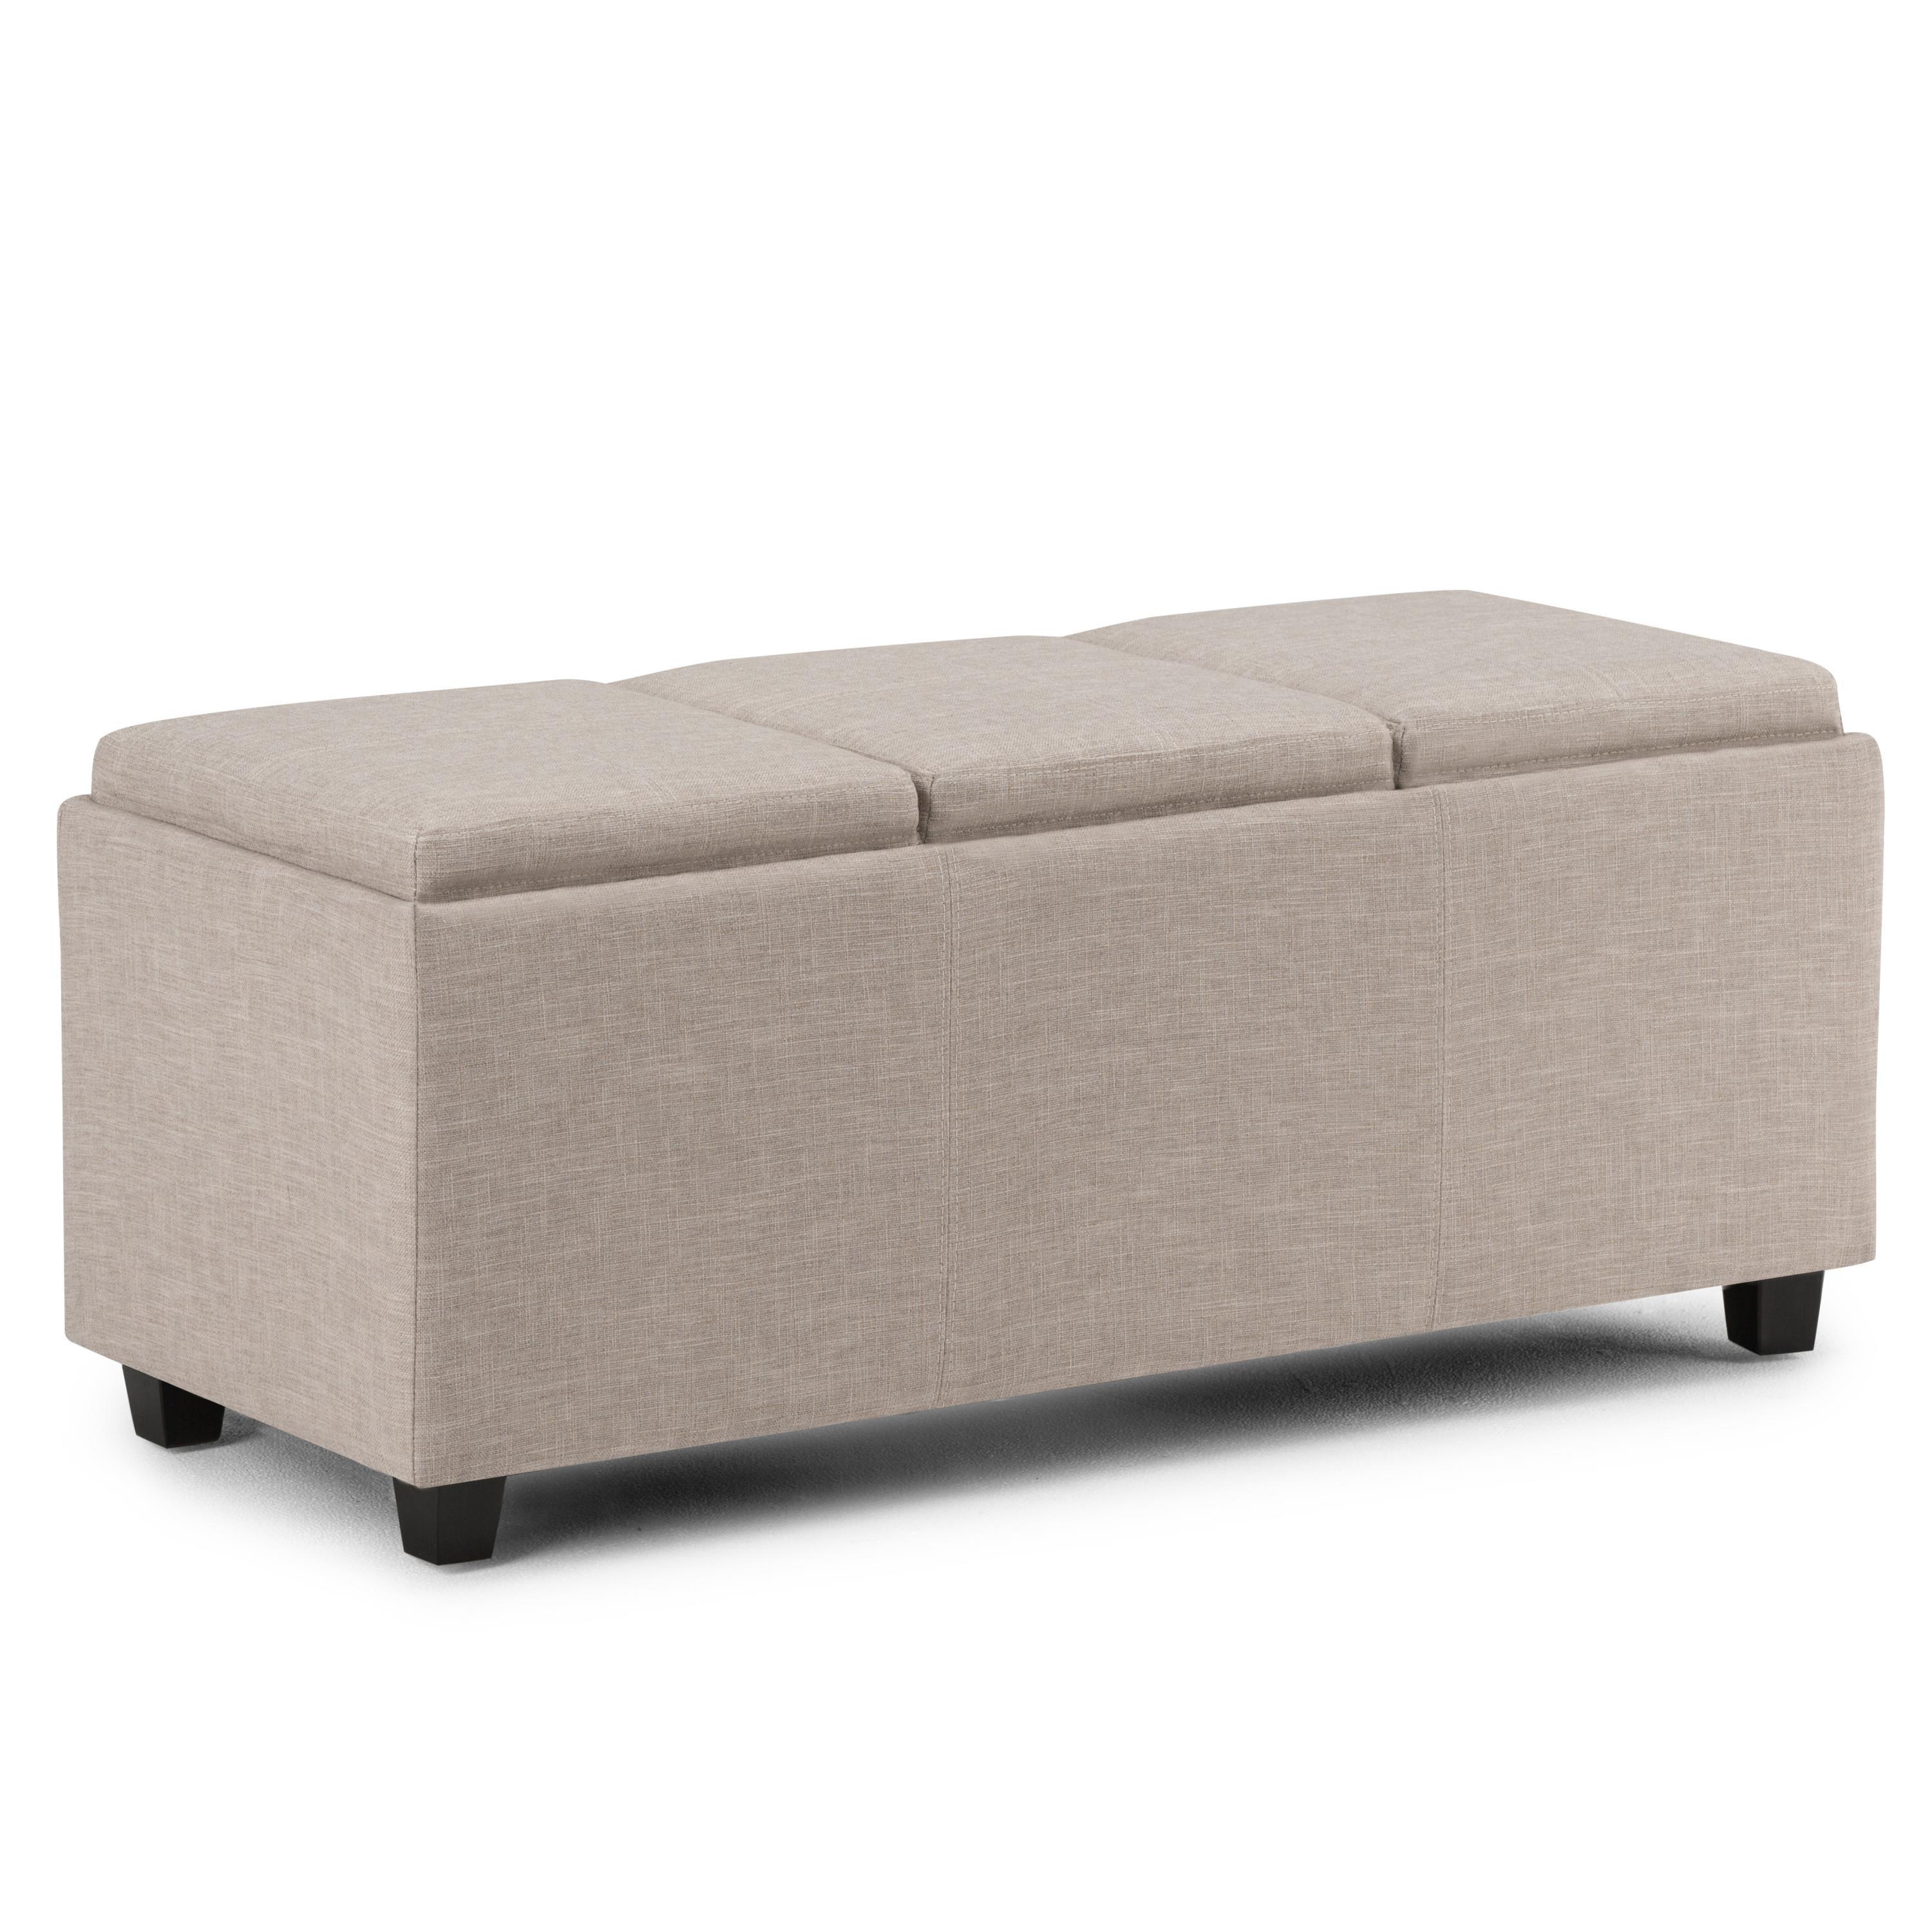 Avalon Natural Linen Look Large Storage Ottoman with Serving Trays